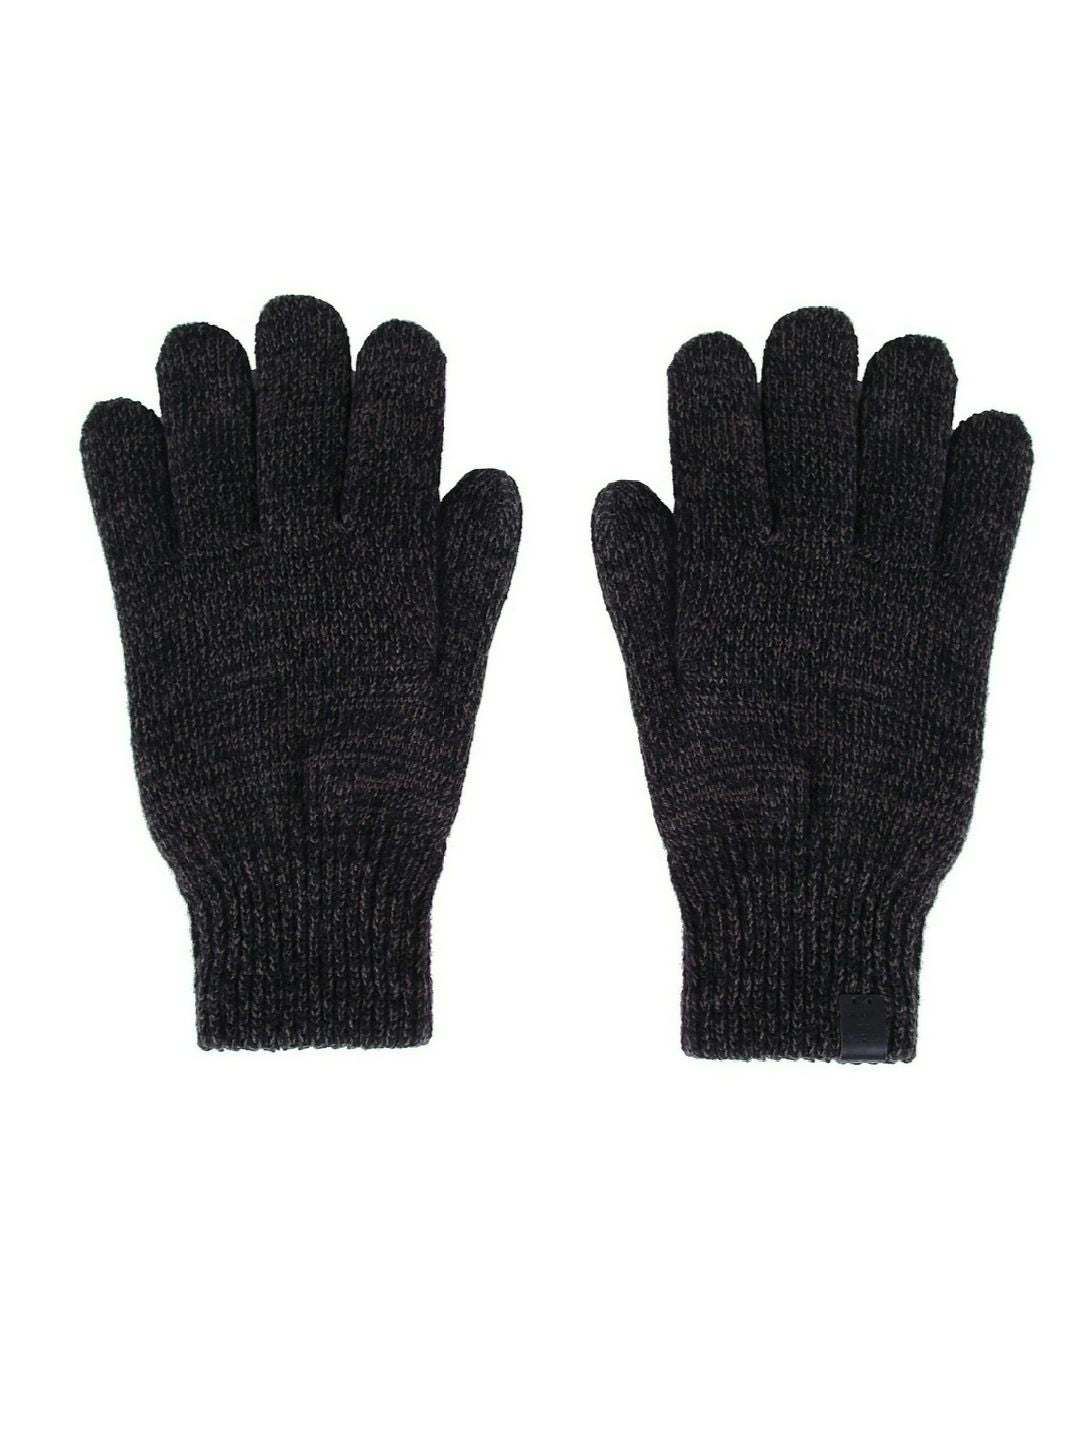 Wool Blend Patch Gloves